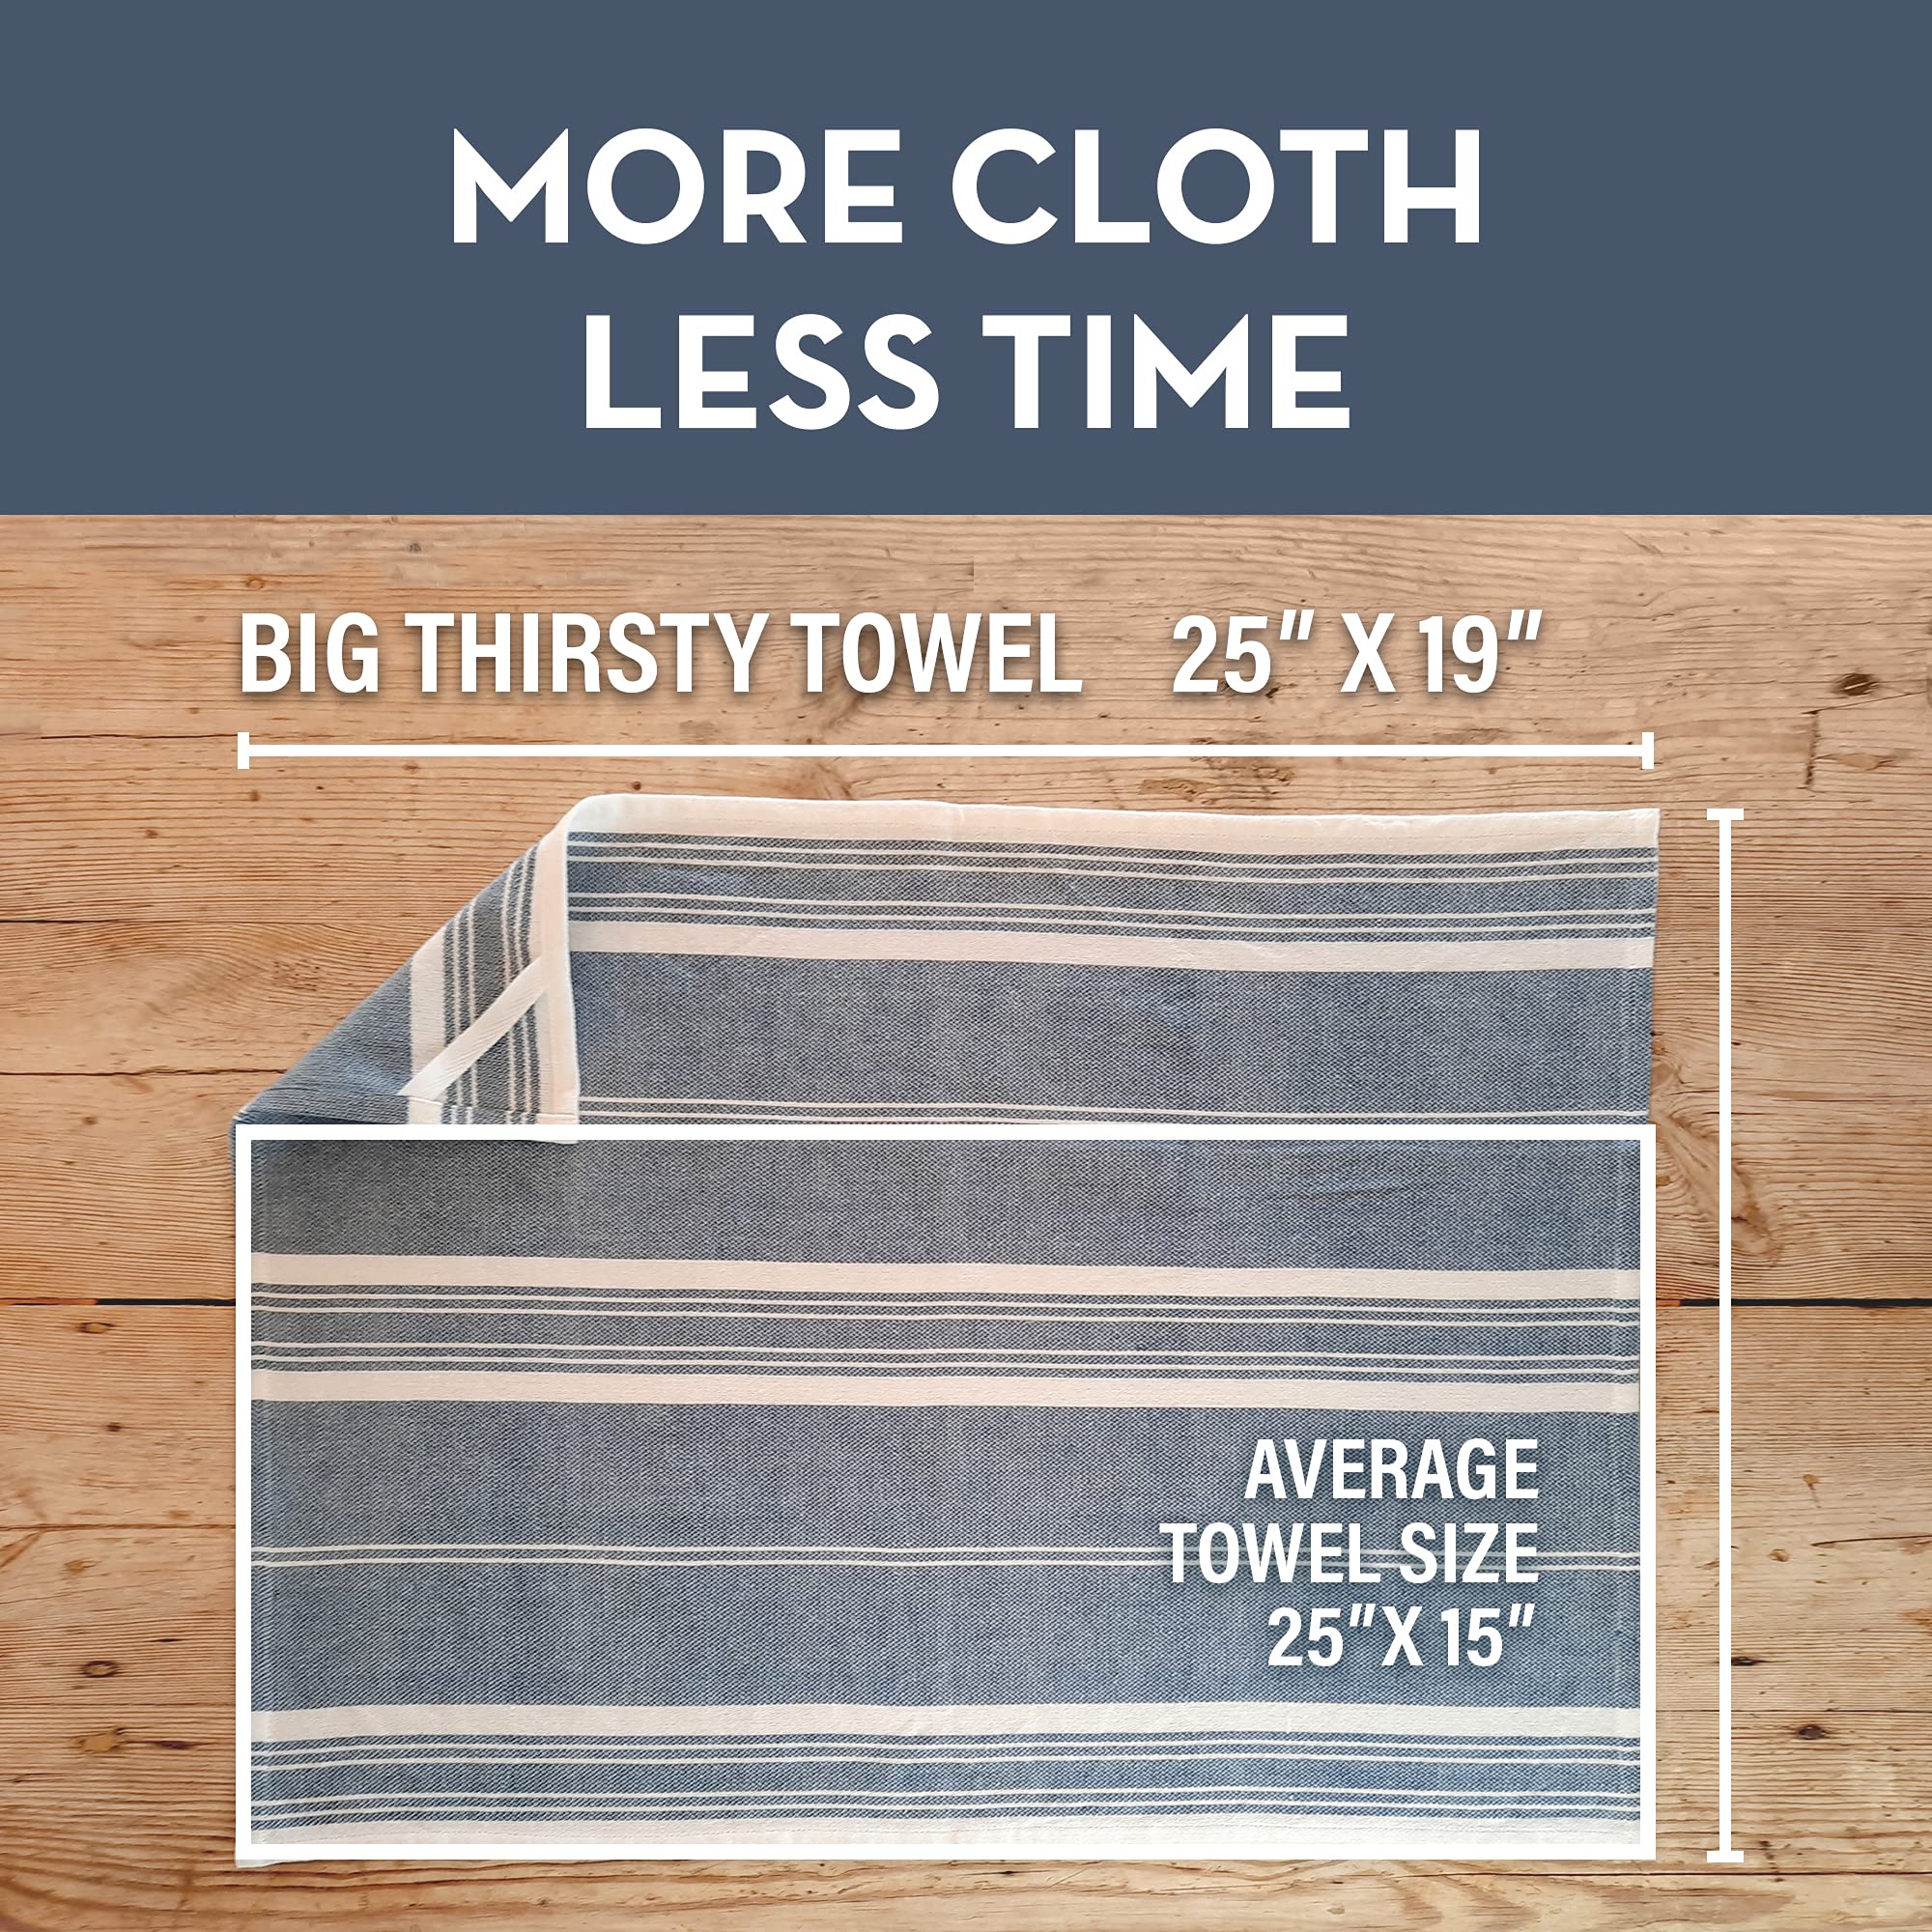 Country Trading Co. Big Thirsty Dish Towels - Organic Cotton Super Absorbent Kitchen Towels, Set of 4 – Soft Weave Machine Washable Tea Towels - 25” x 19” (Blue)